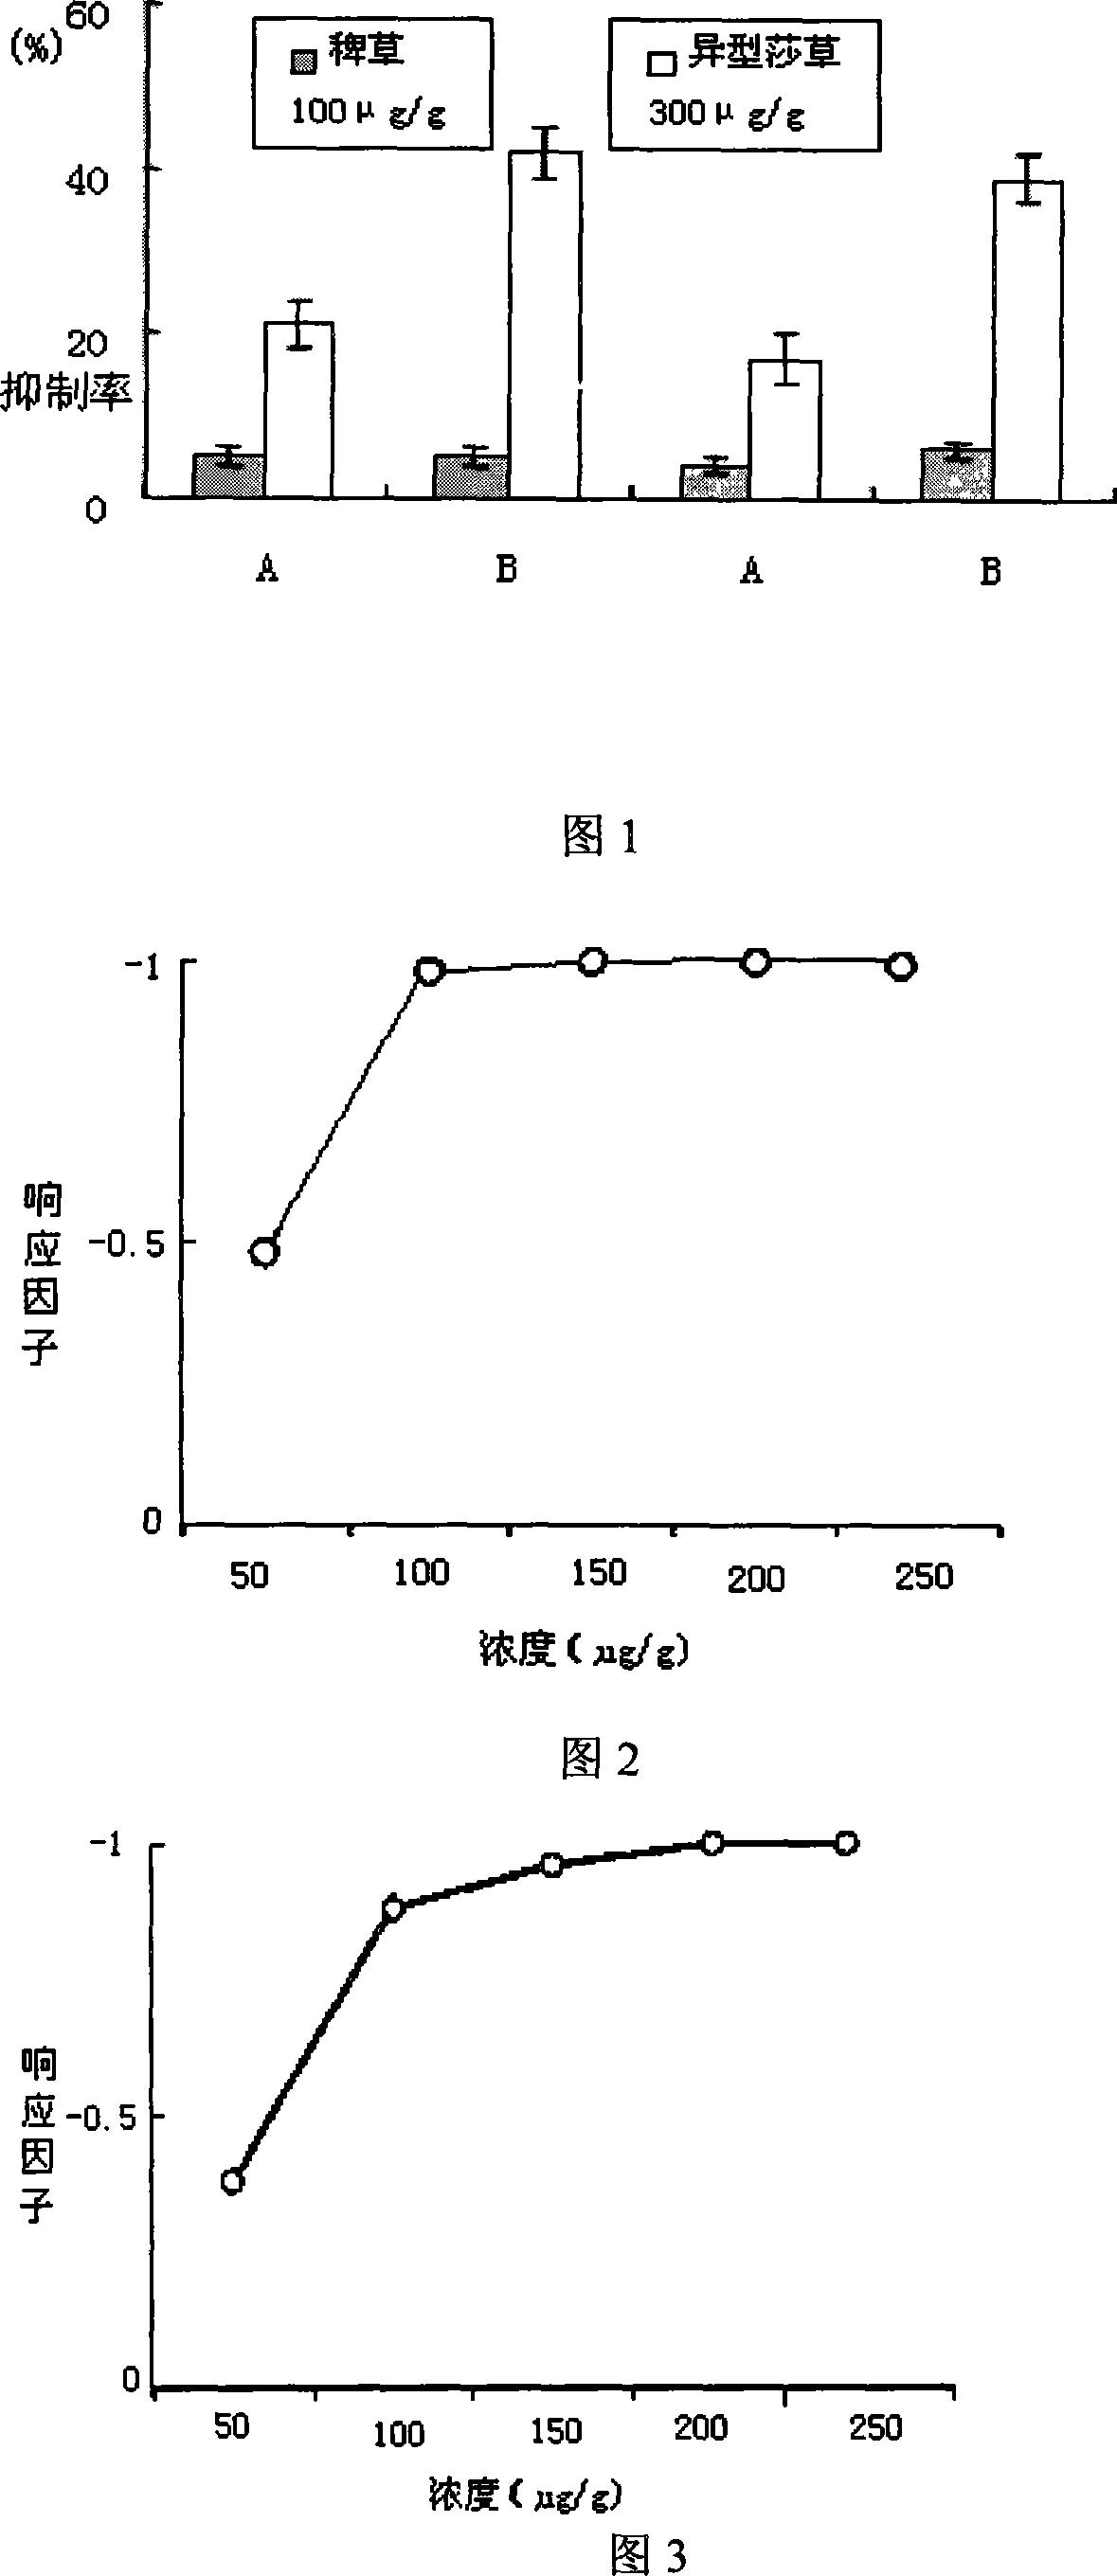 Synthesis method and application of 5,7,4'-trihydroxy-3',5'-dimethoxyflavone